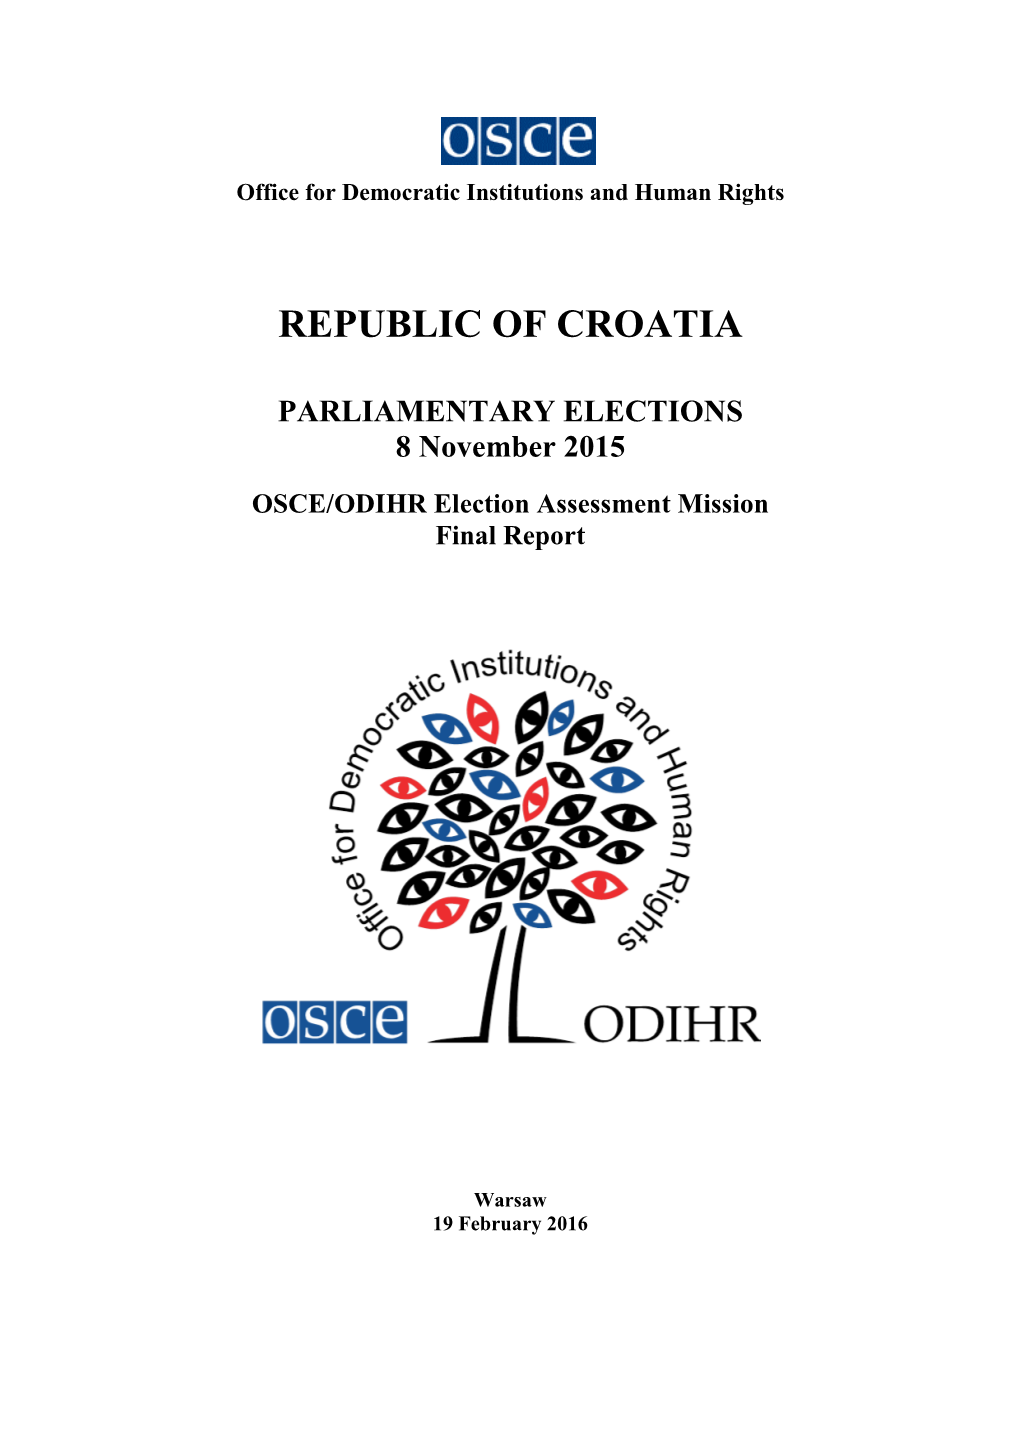 Final Report on the 2015 Parliamentary Elections